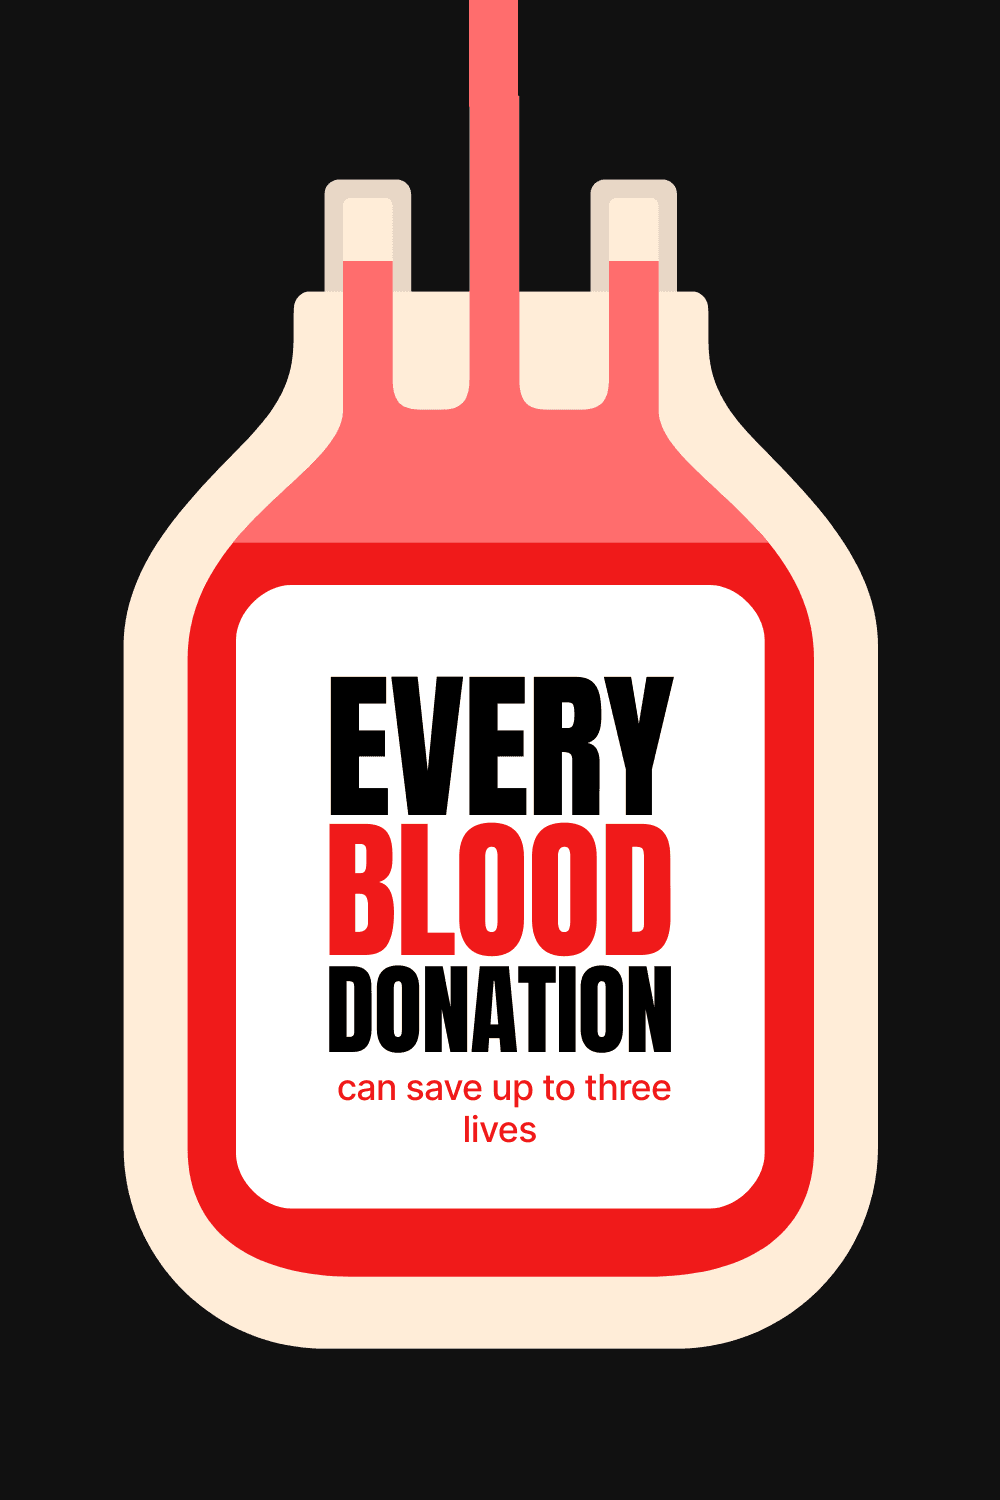 iv-themed-blood-donor-day-pinterest-pin-template-thumbnail-img